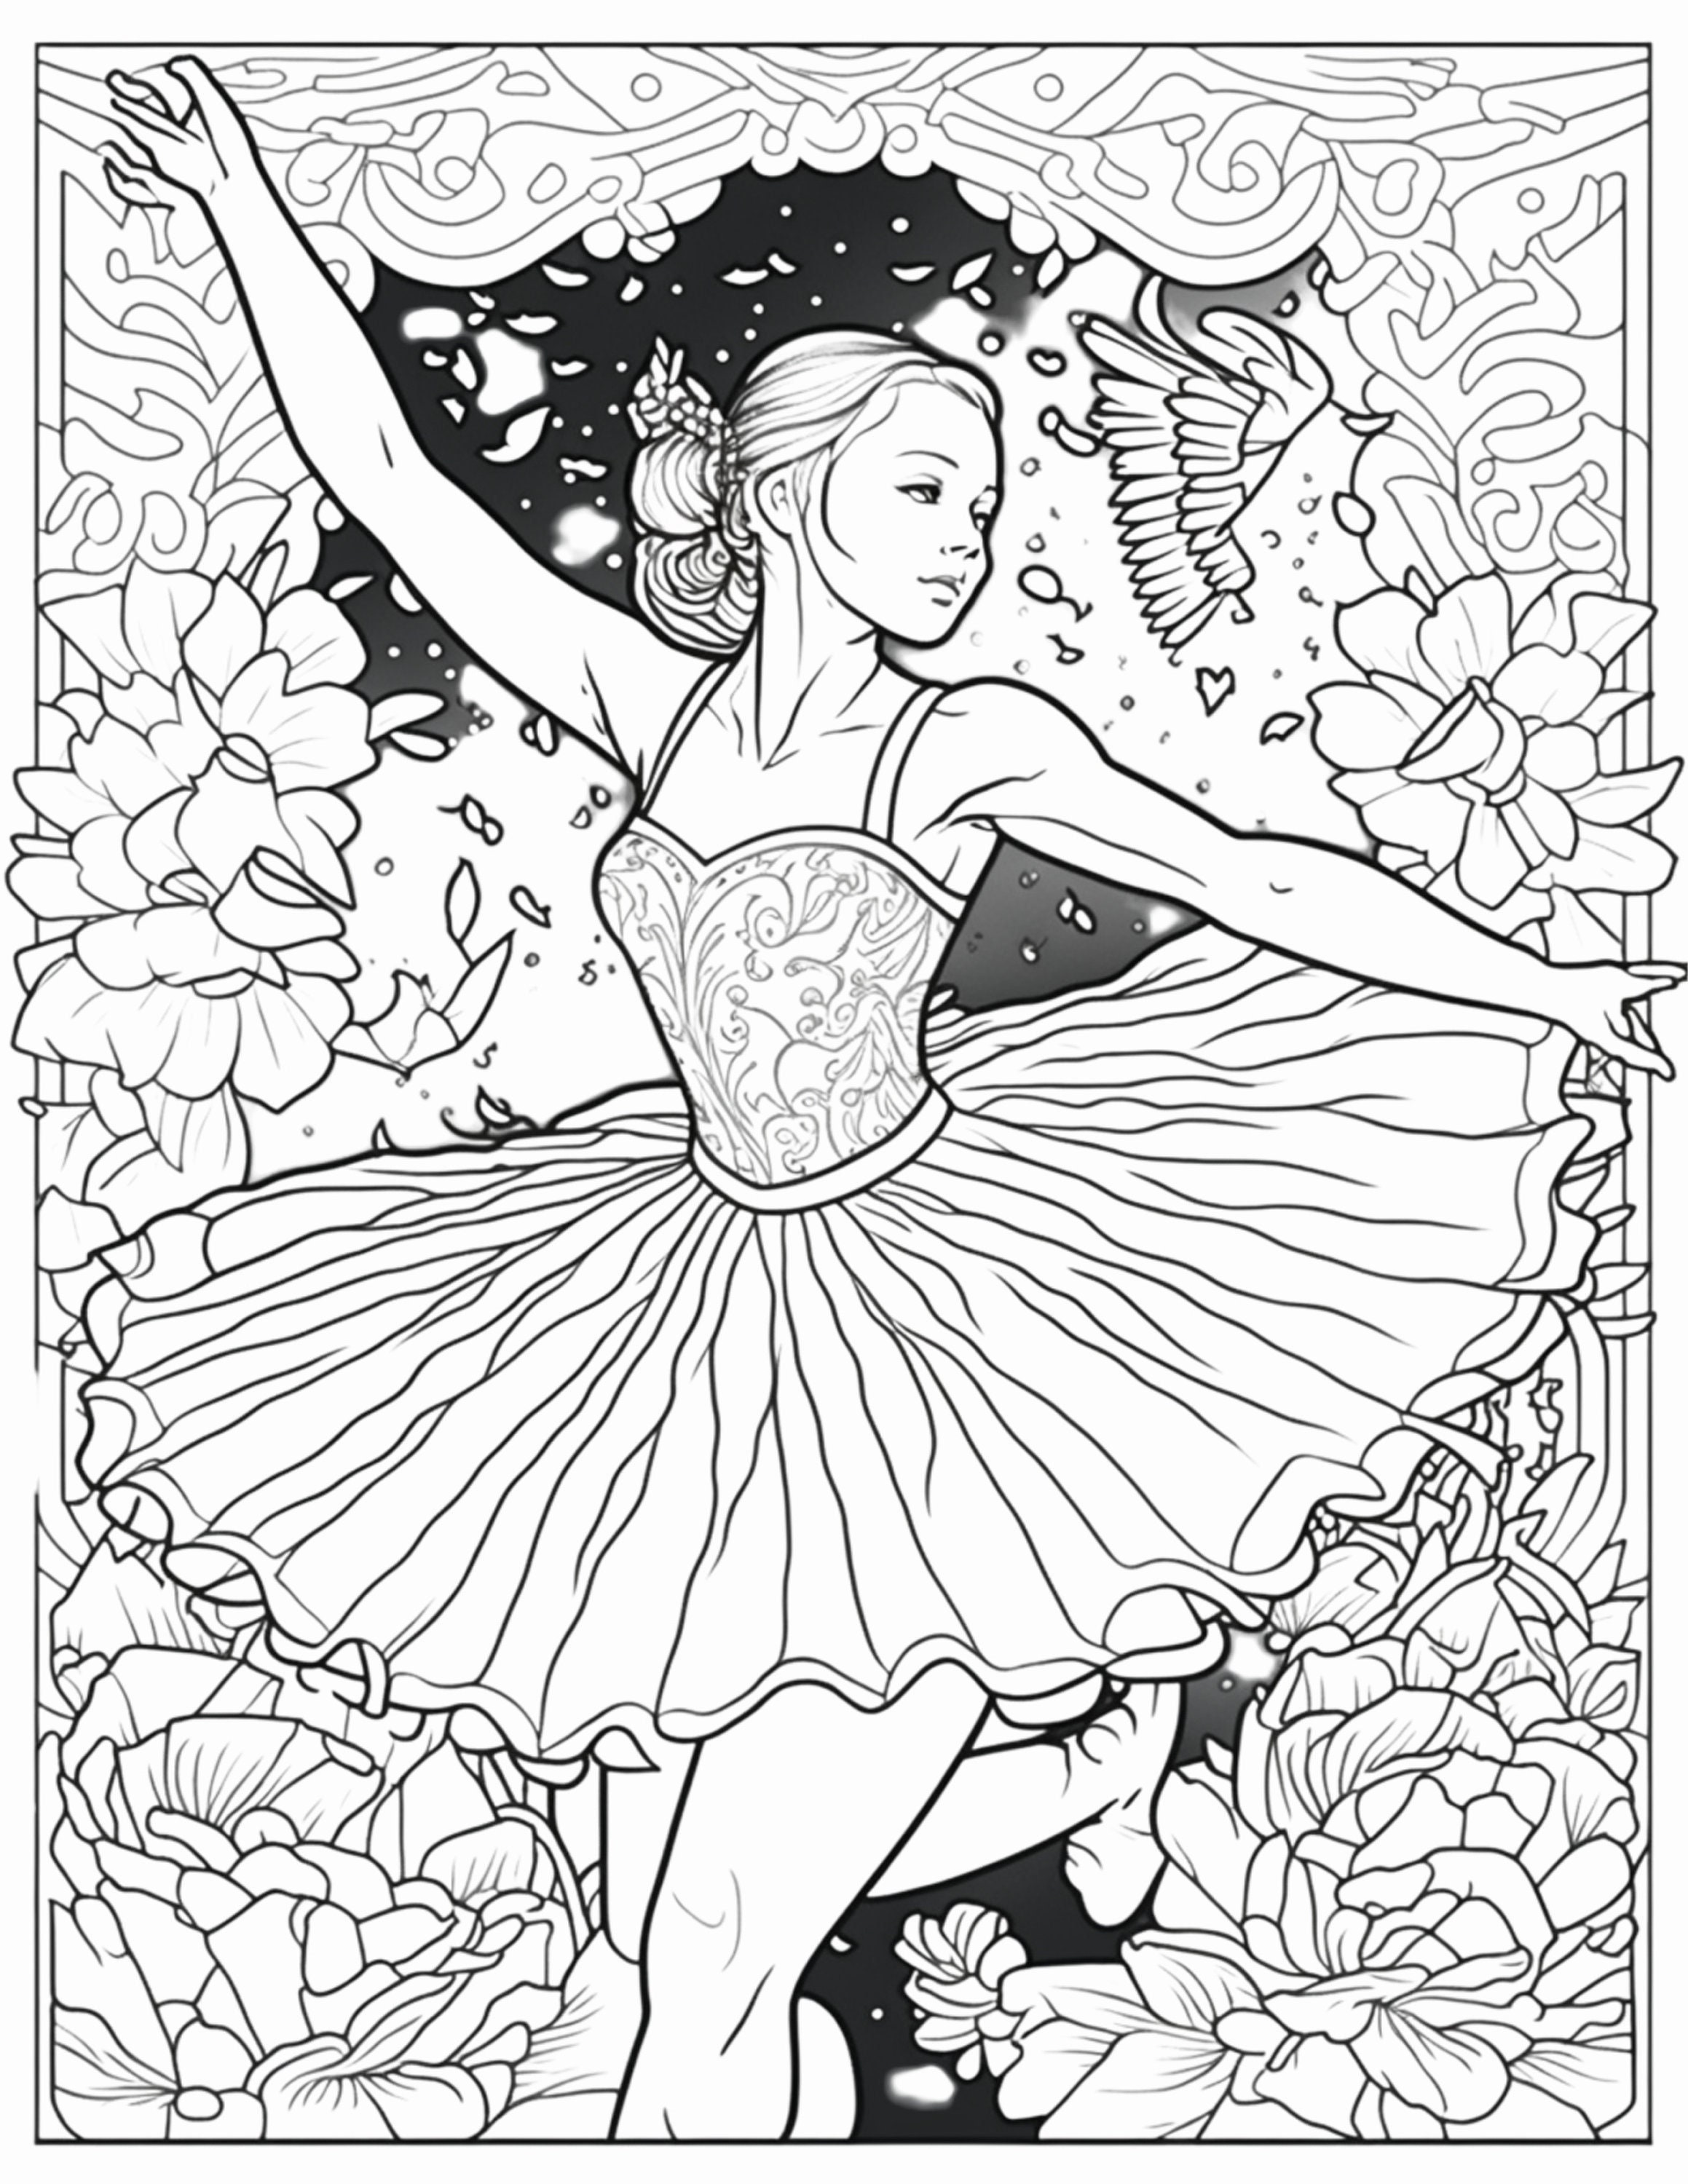 Three ballerina coloring sheets for instant download